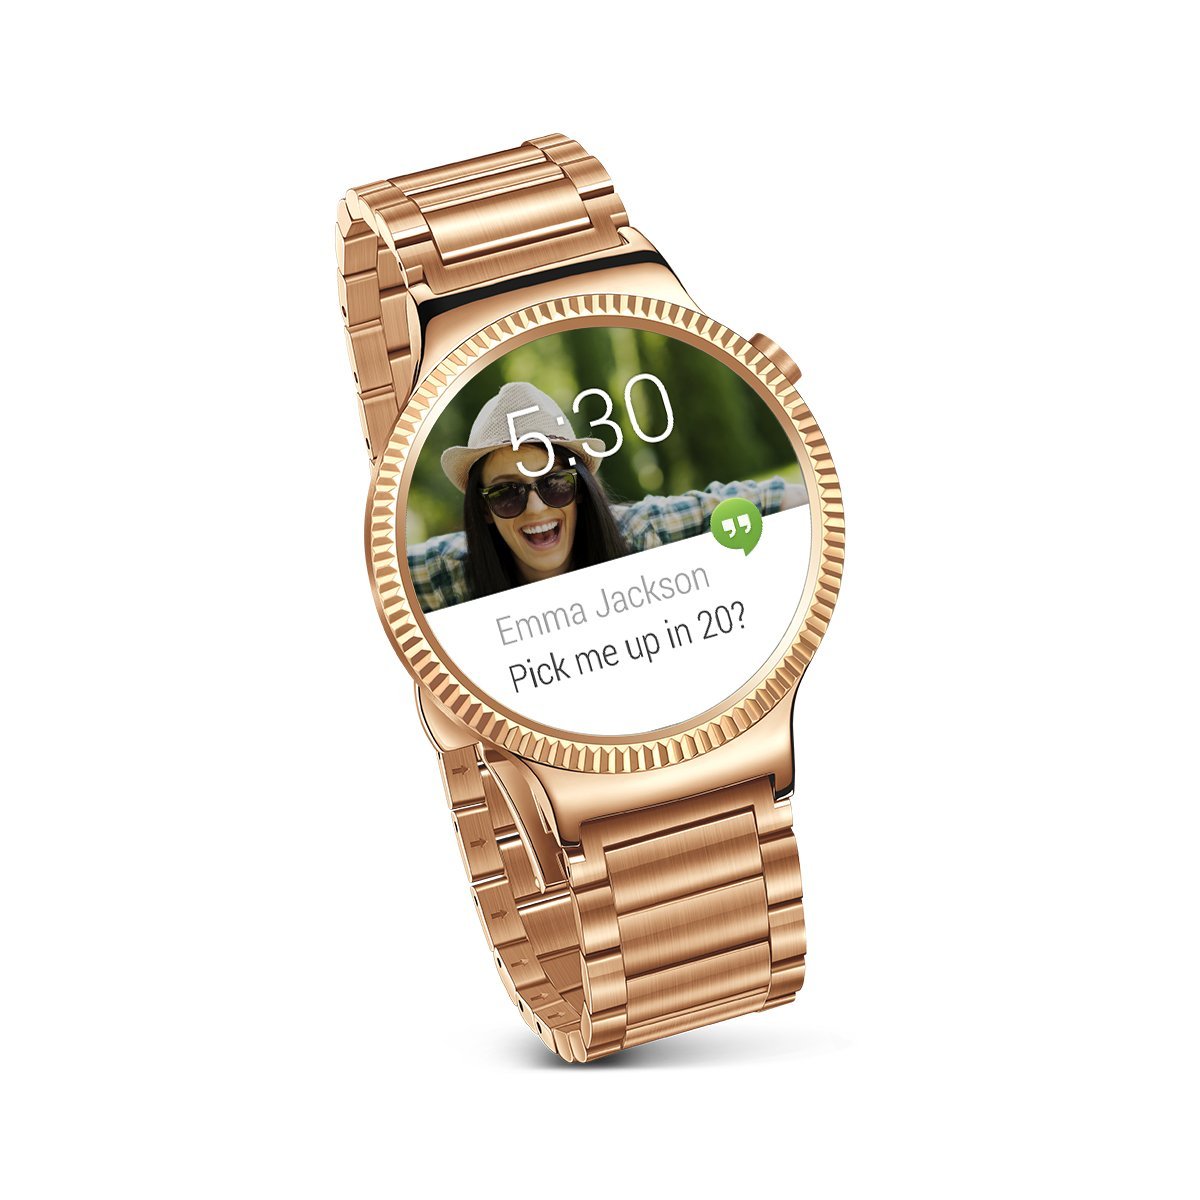 Huawei Watch Pre-Order Suggests Android Wear Coming To iOS